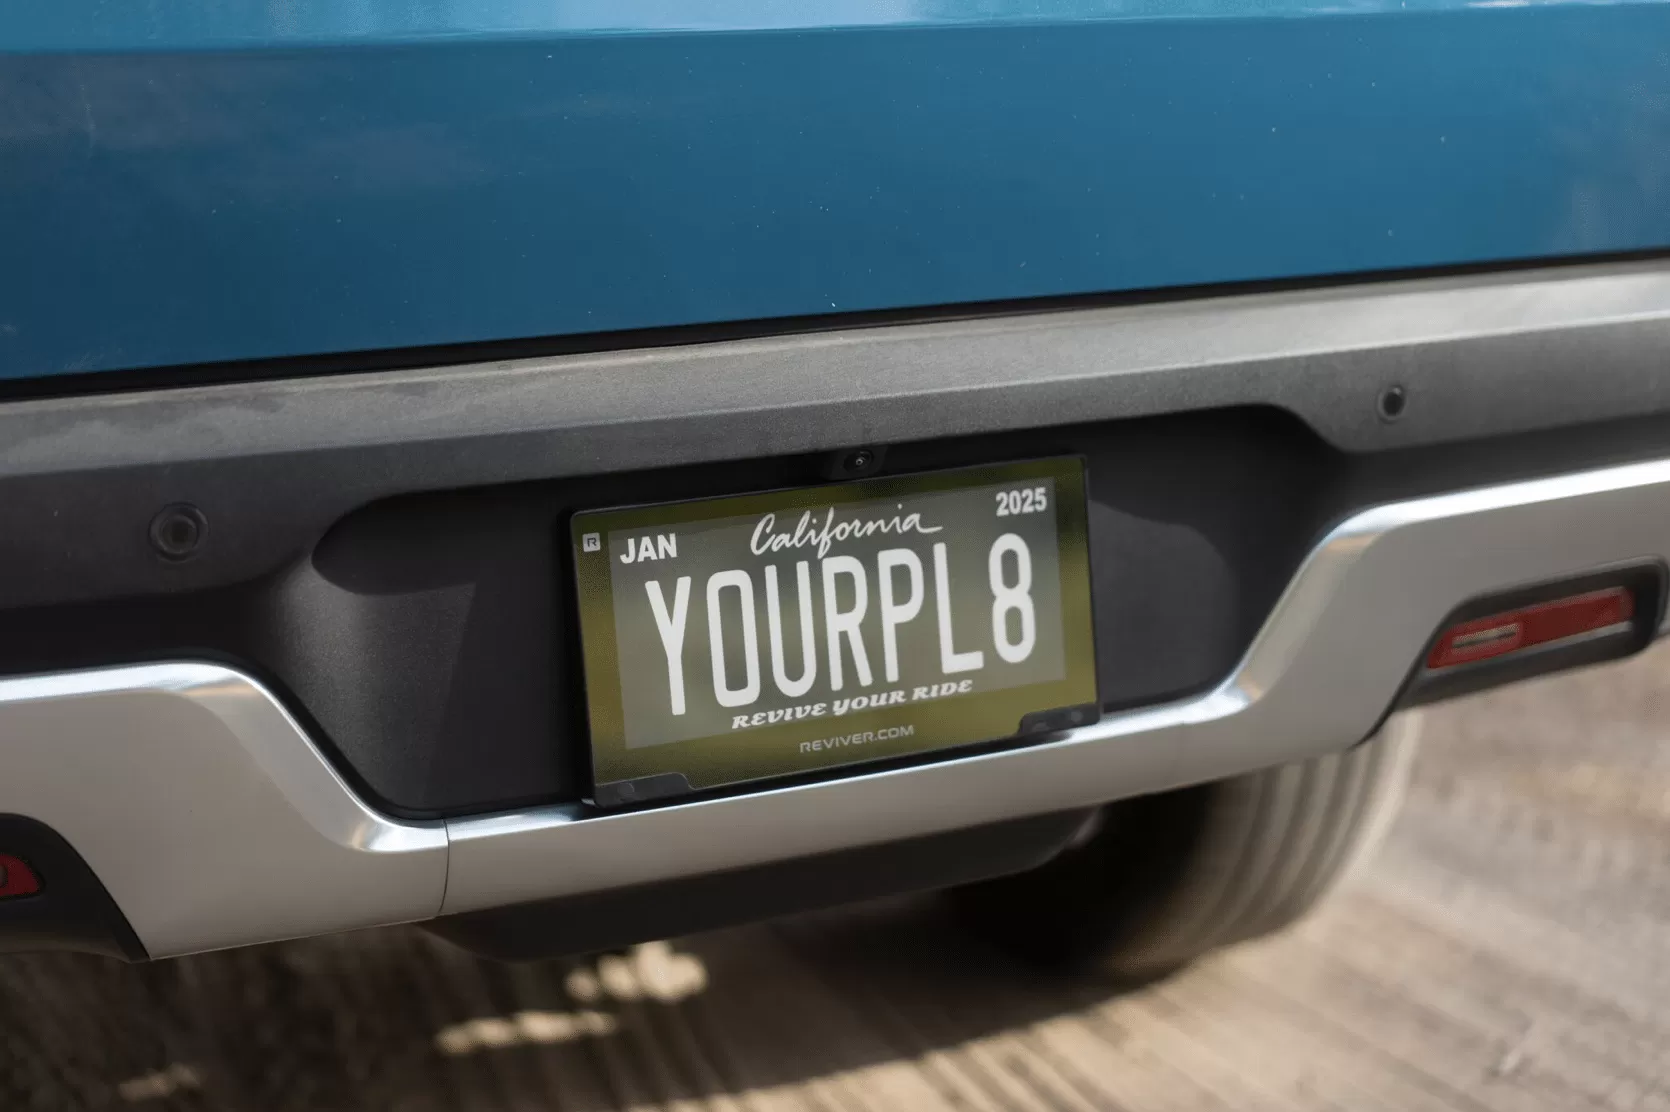 Digital License Plates Approved in the US 